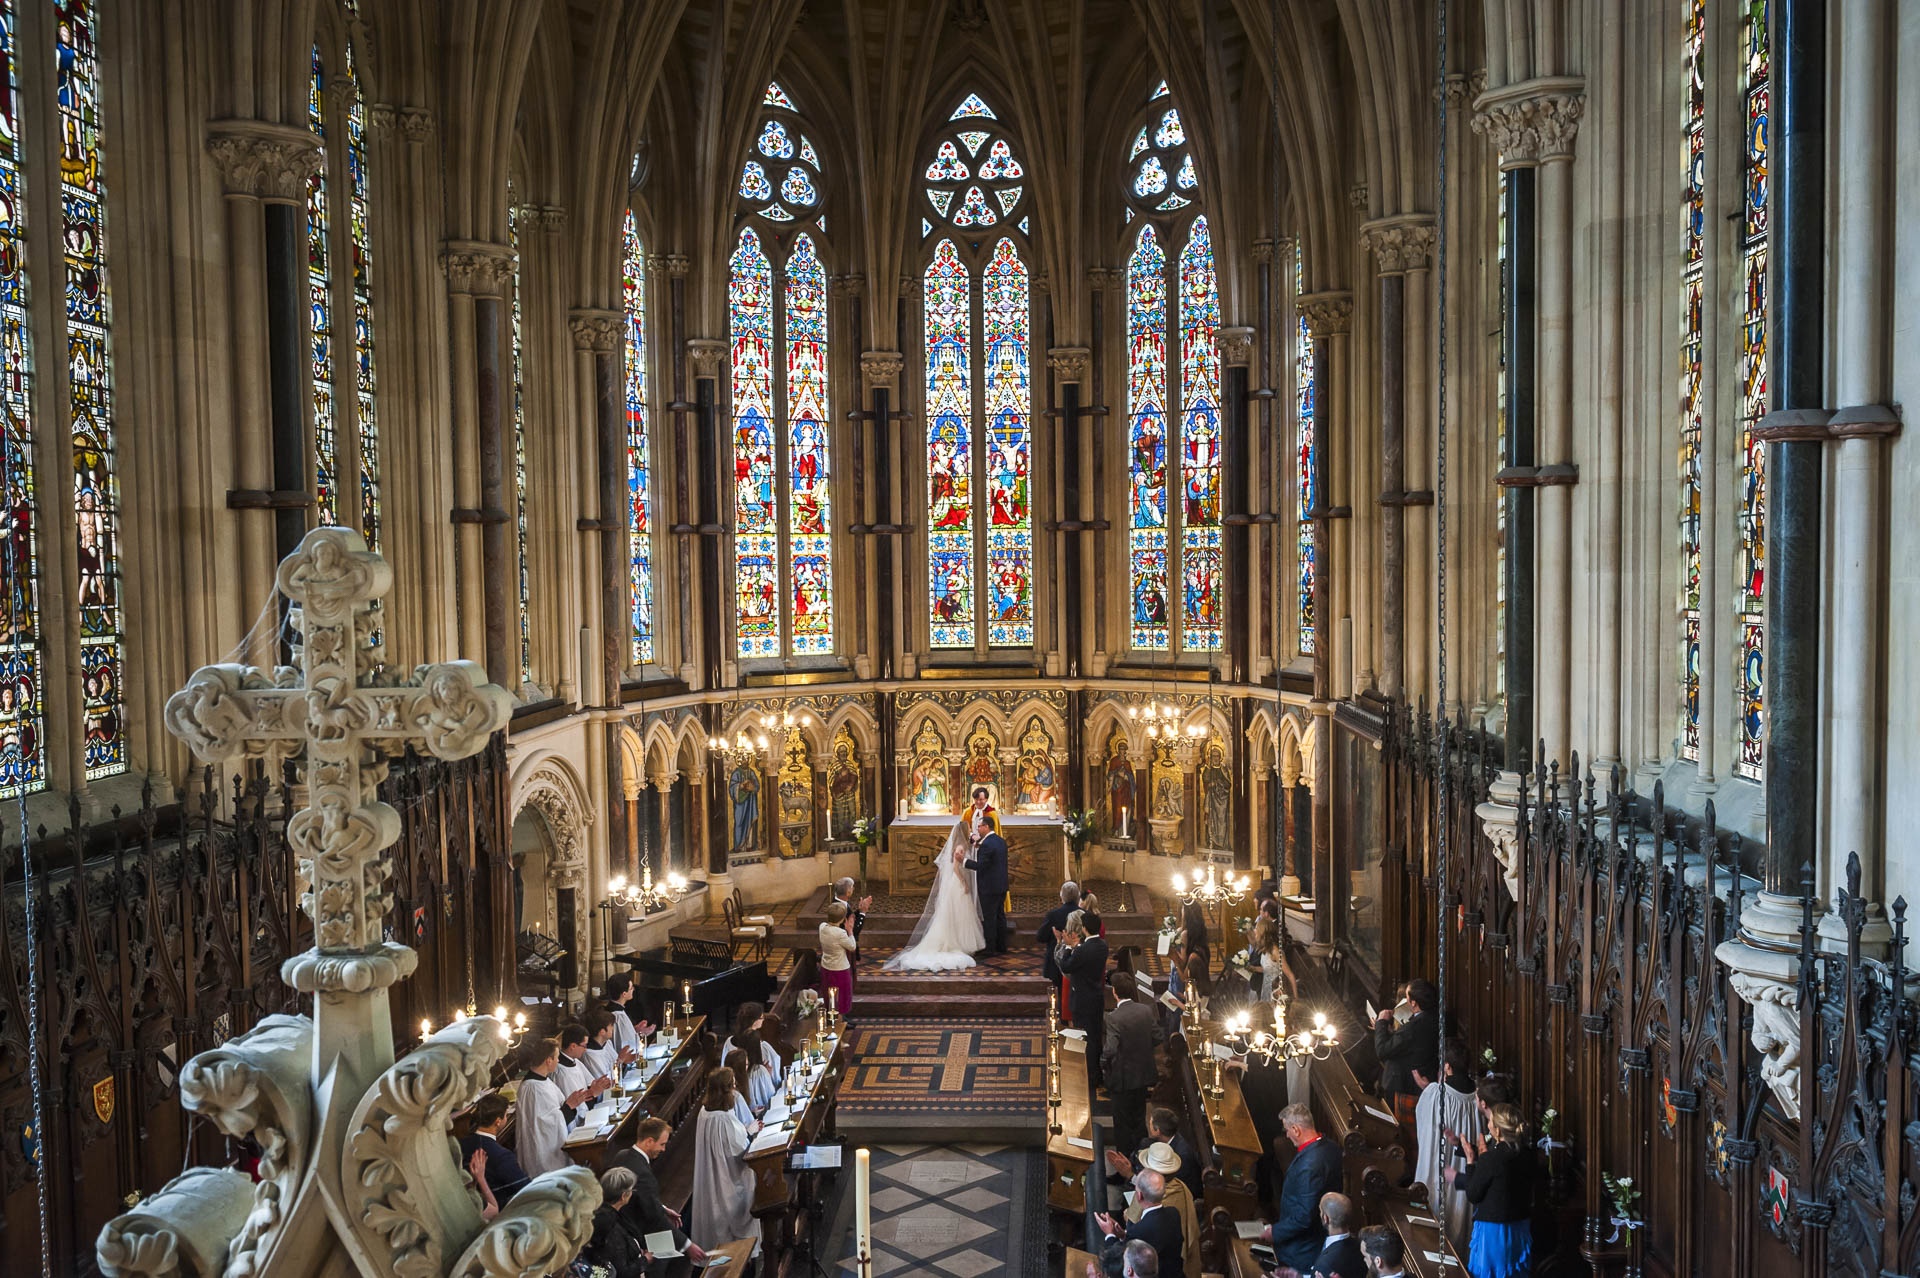 The wedding ceremony at Exeter College Chapel